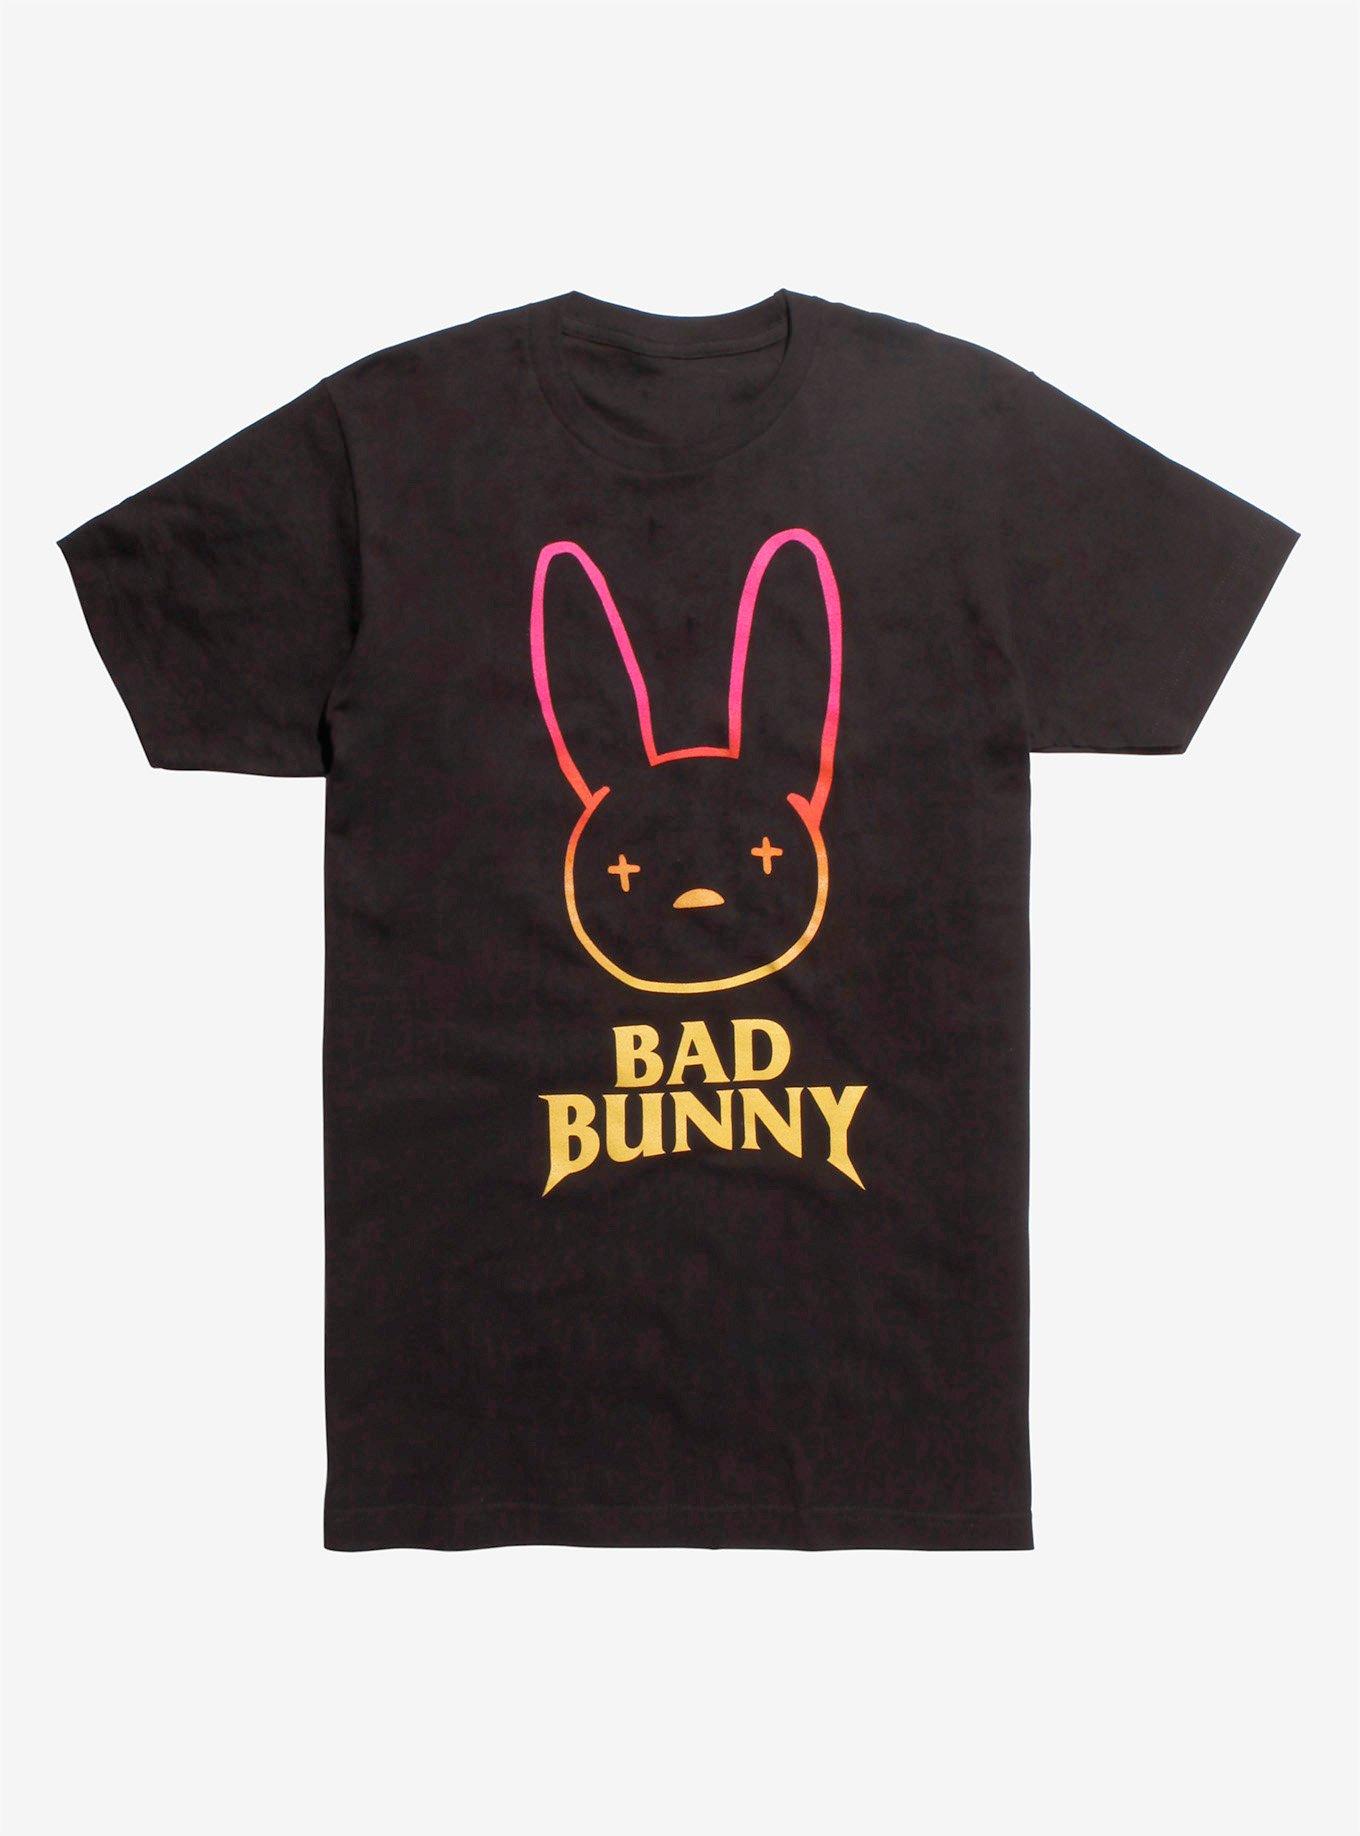 Customize Your Bad Bunny Baseball Jersey for Summer